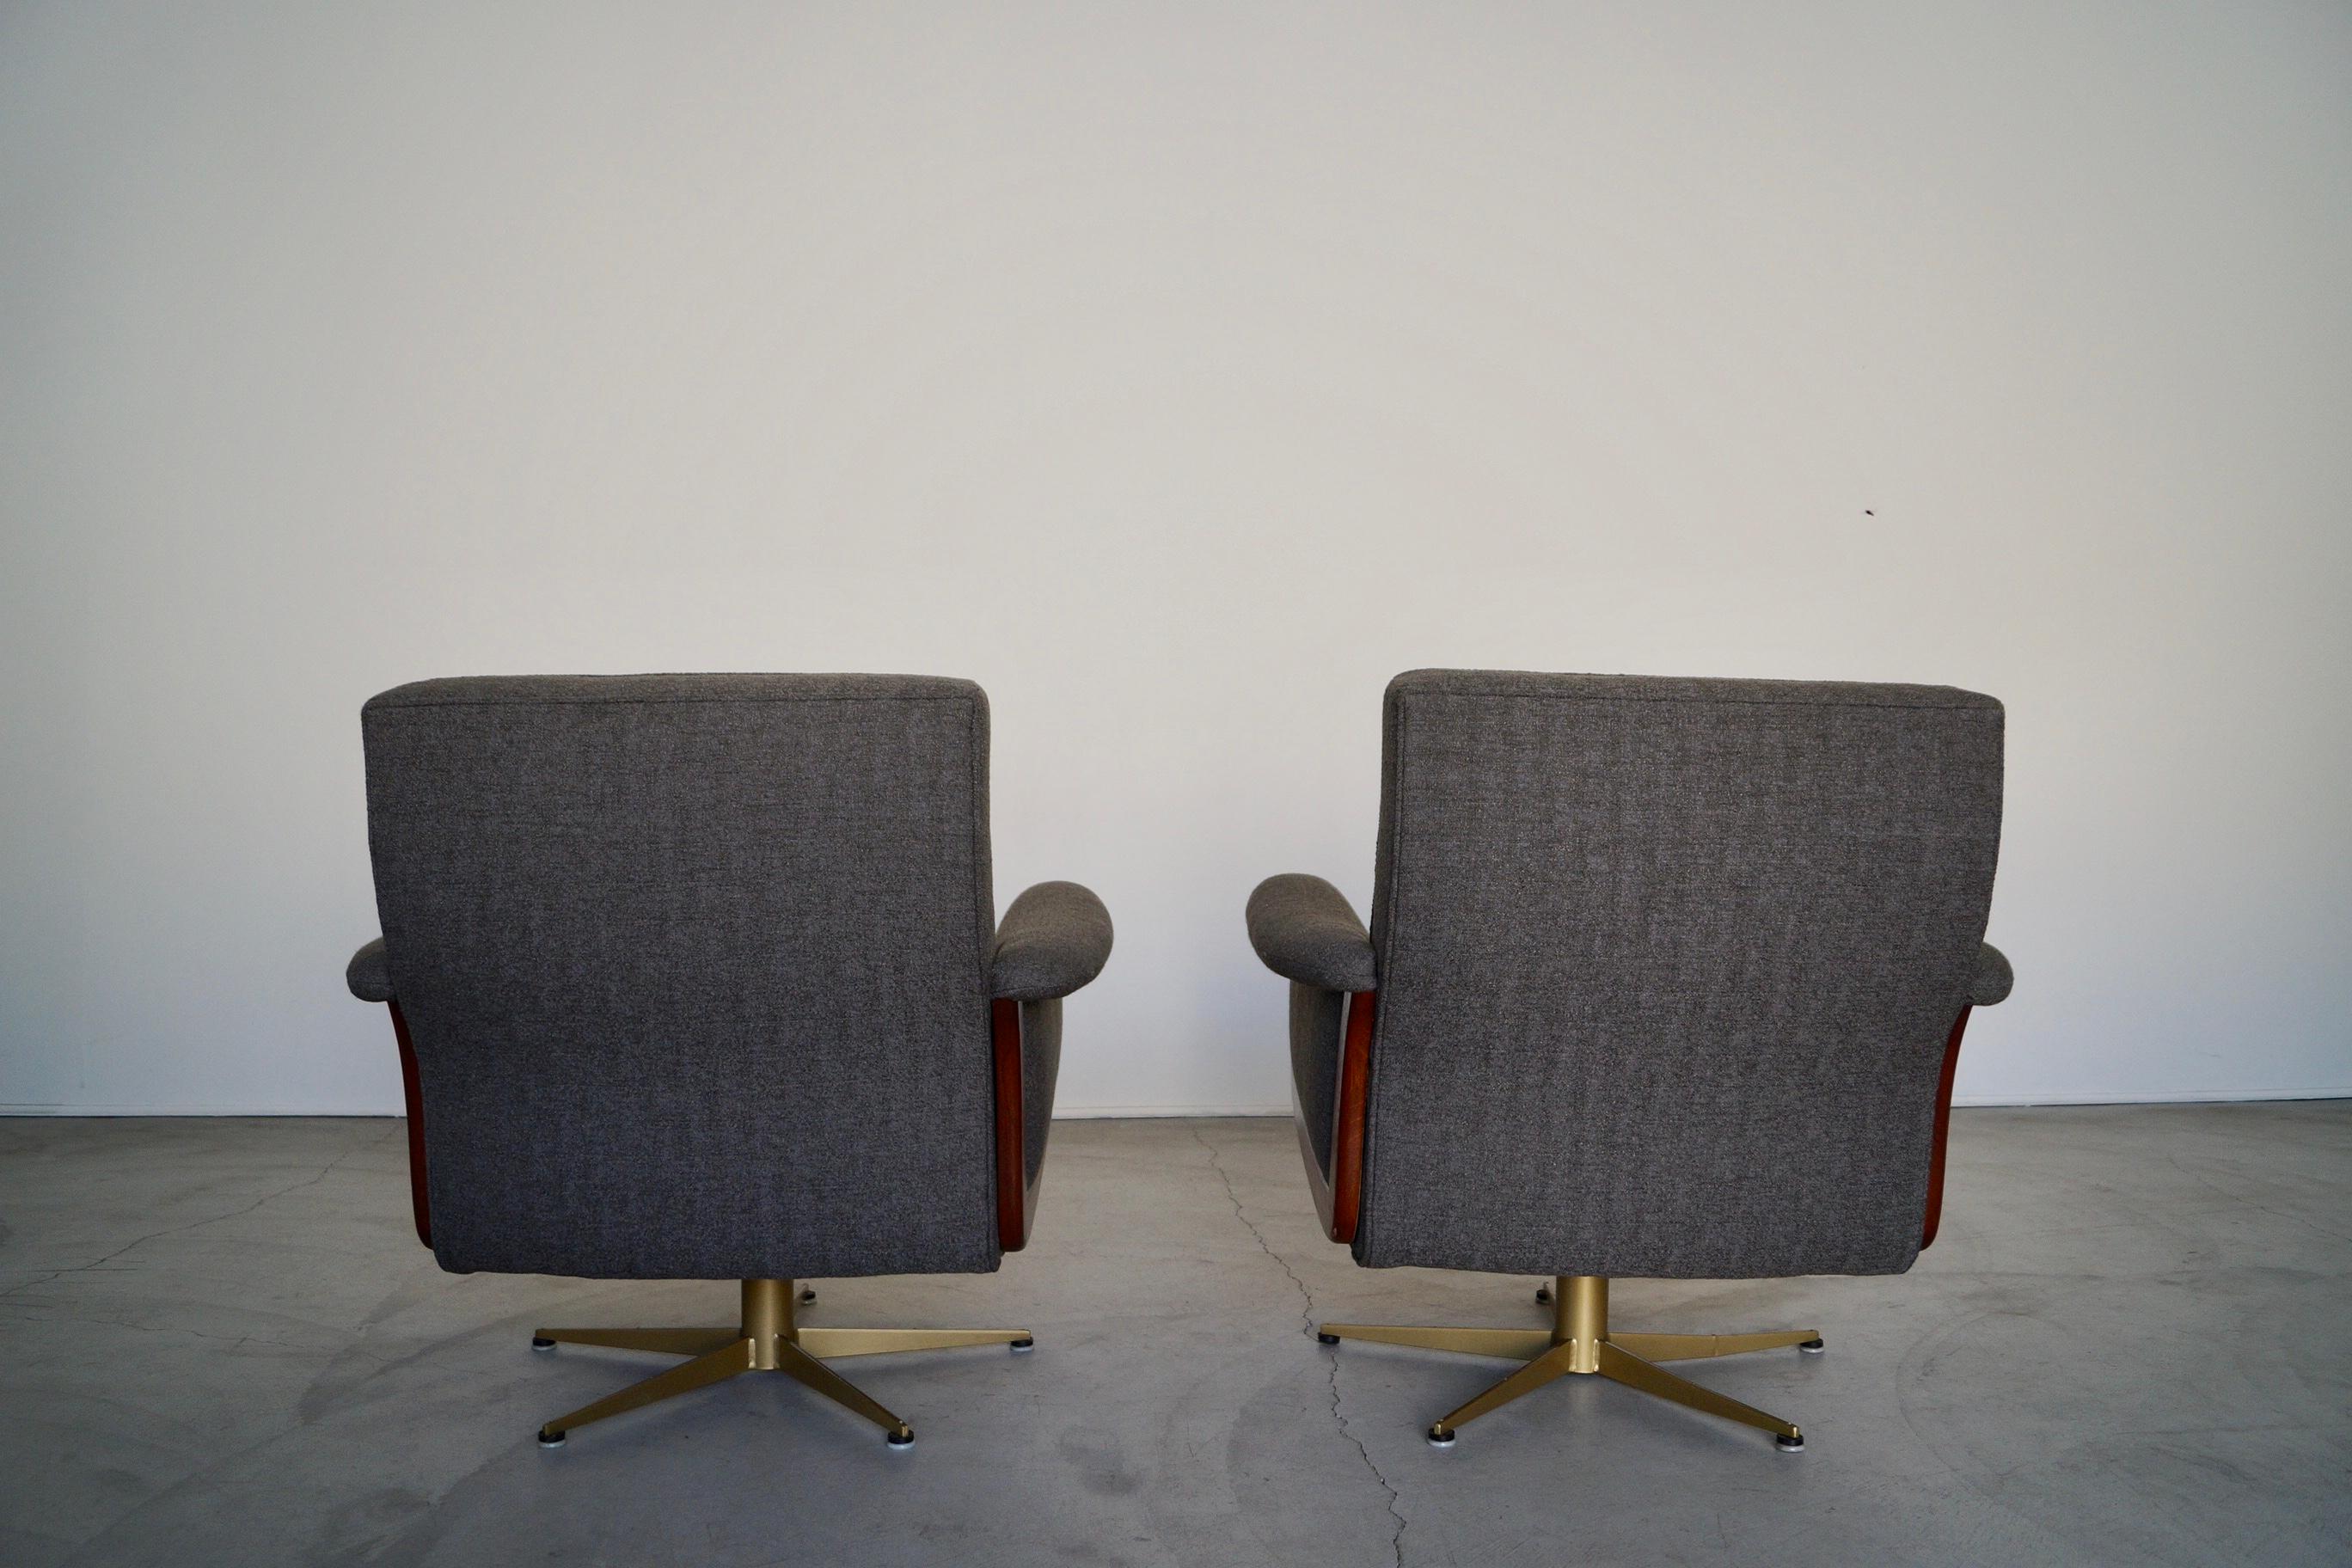 1970's Mid-Century Modern Swivel Lounge Chairs - a Pair For Sale 2